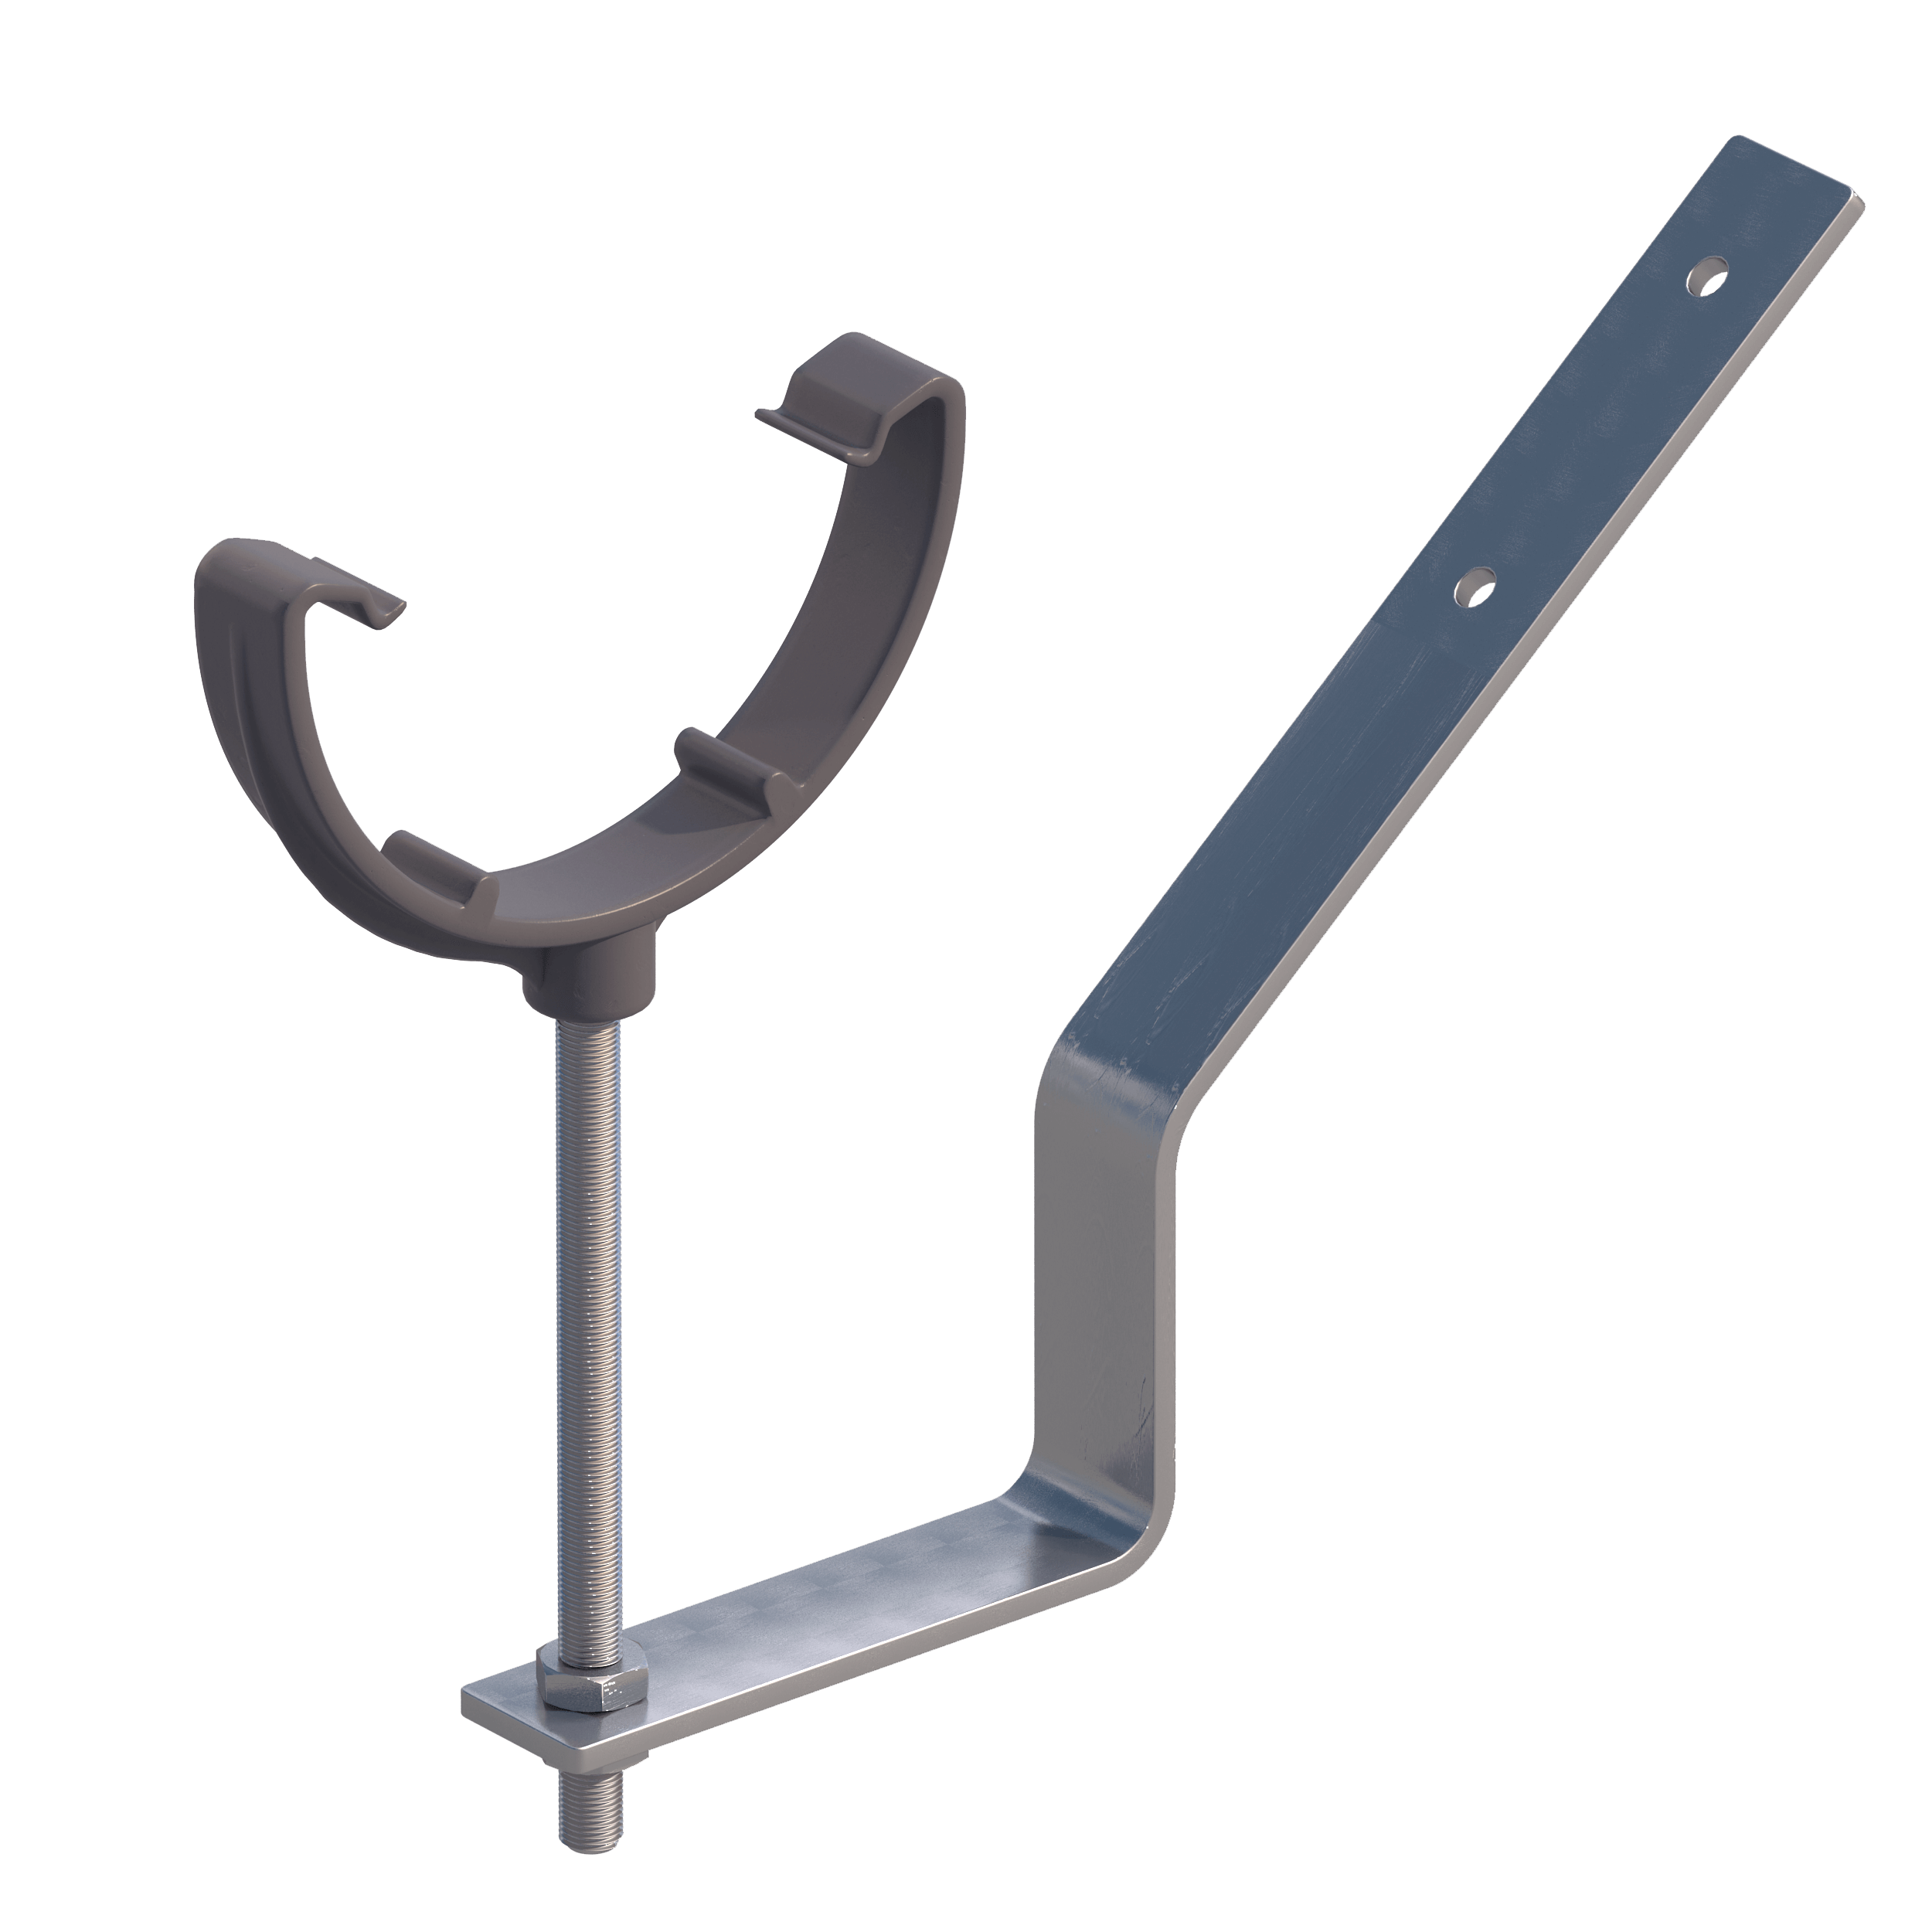 RL611 Polypipe 150mm half round top rafter rise and fall gutter bracket